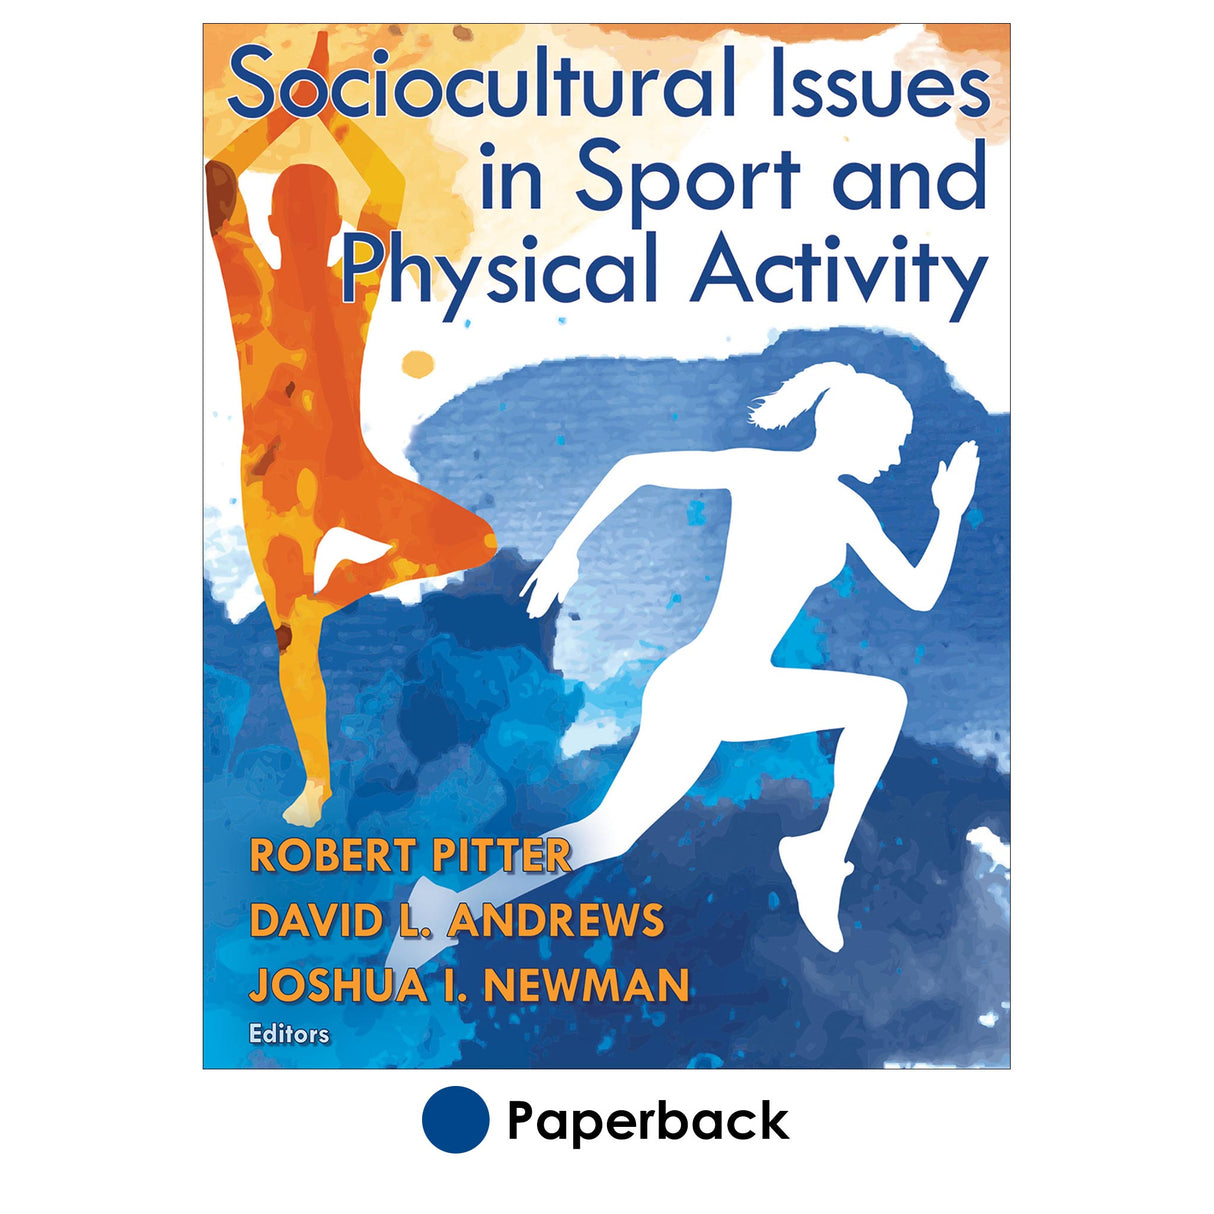 Sociocultural Issues in Sport and Physical Activity